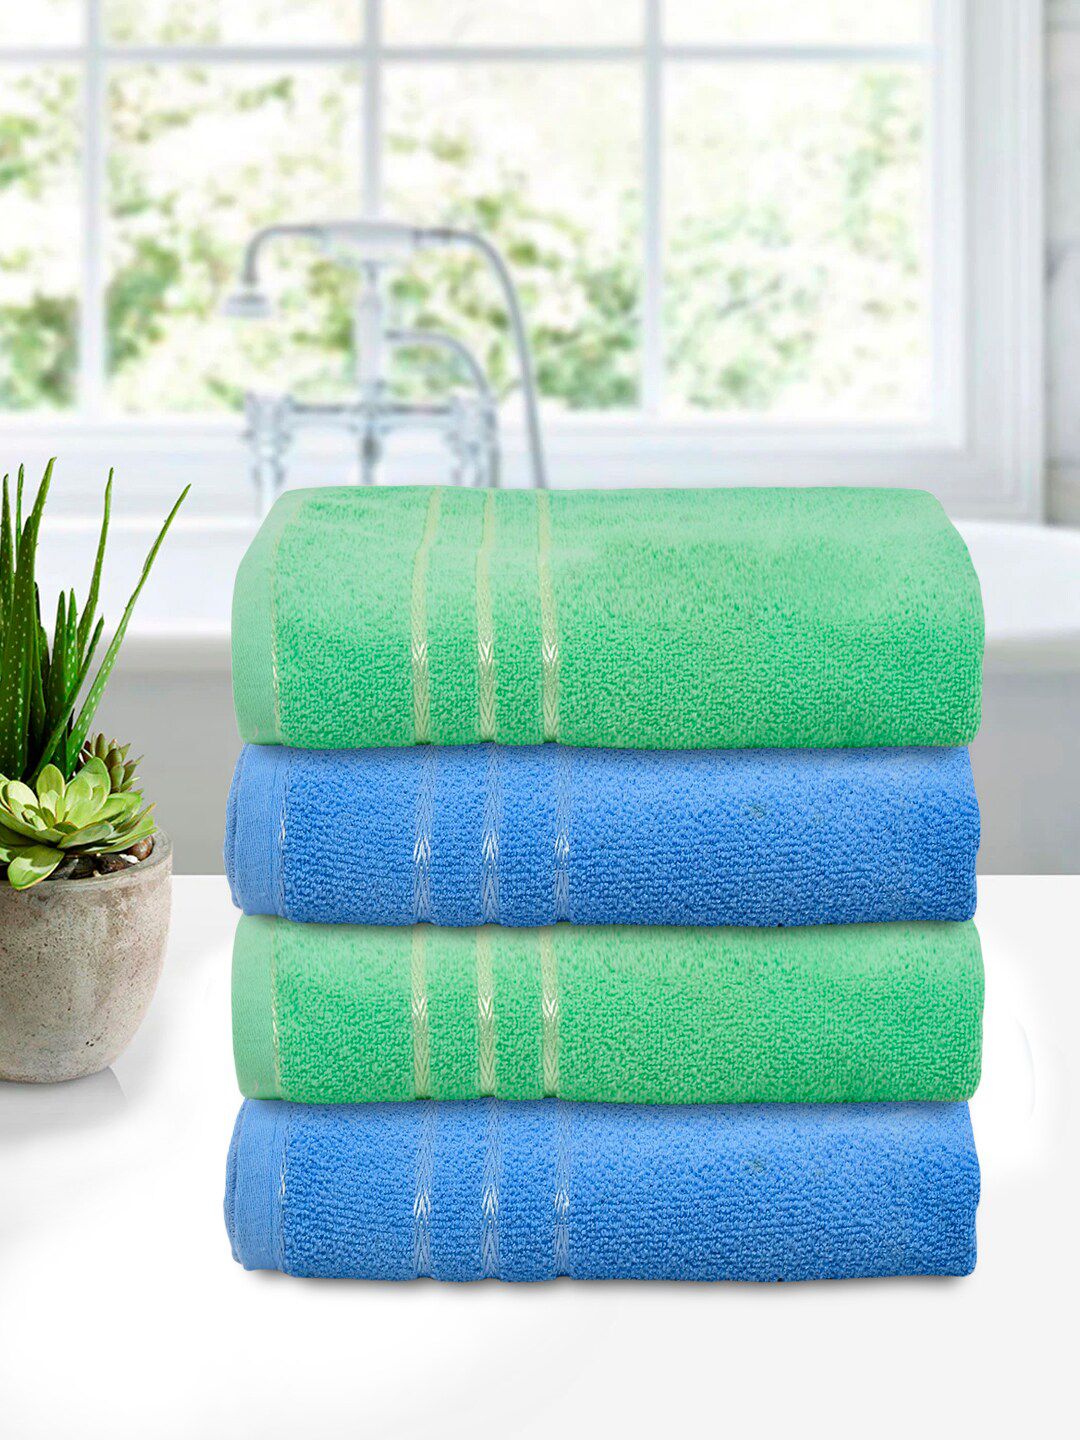 Kuber Industries Set of 4 Green & Black Cotton Bath Towels Price in India